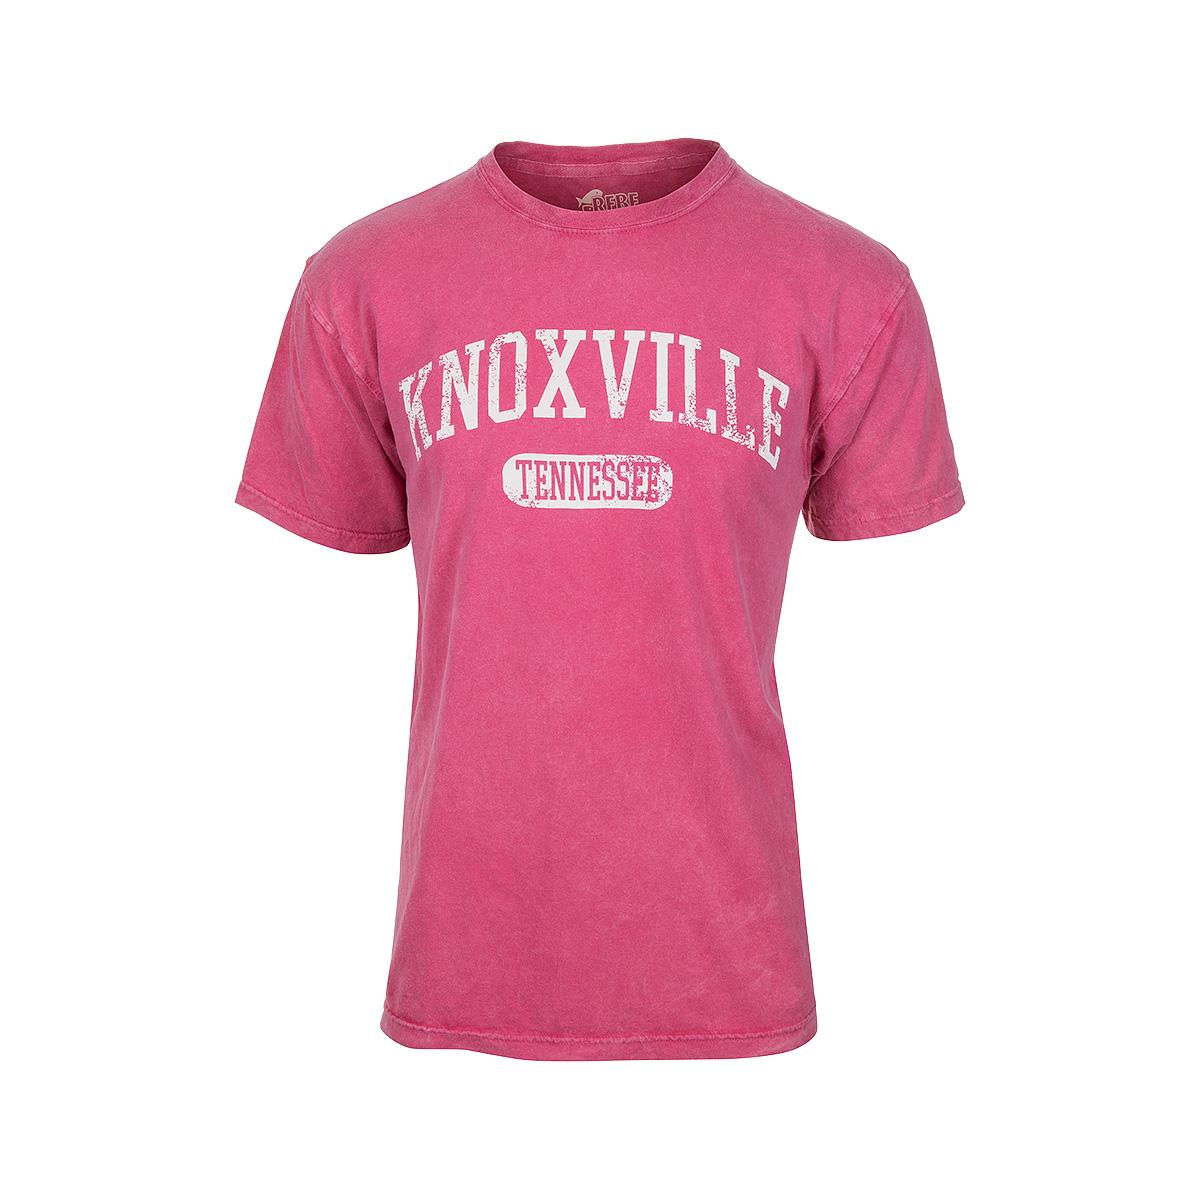  Classic Arch Knoxville Tn T- Shirt